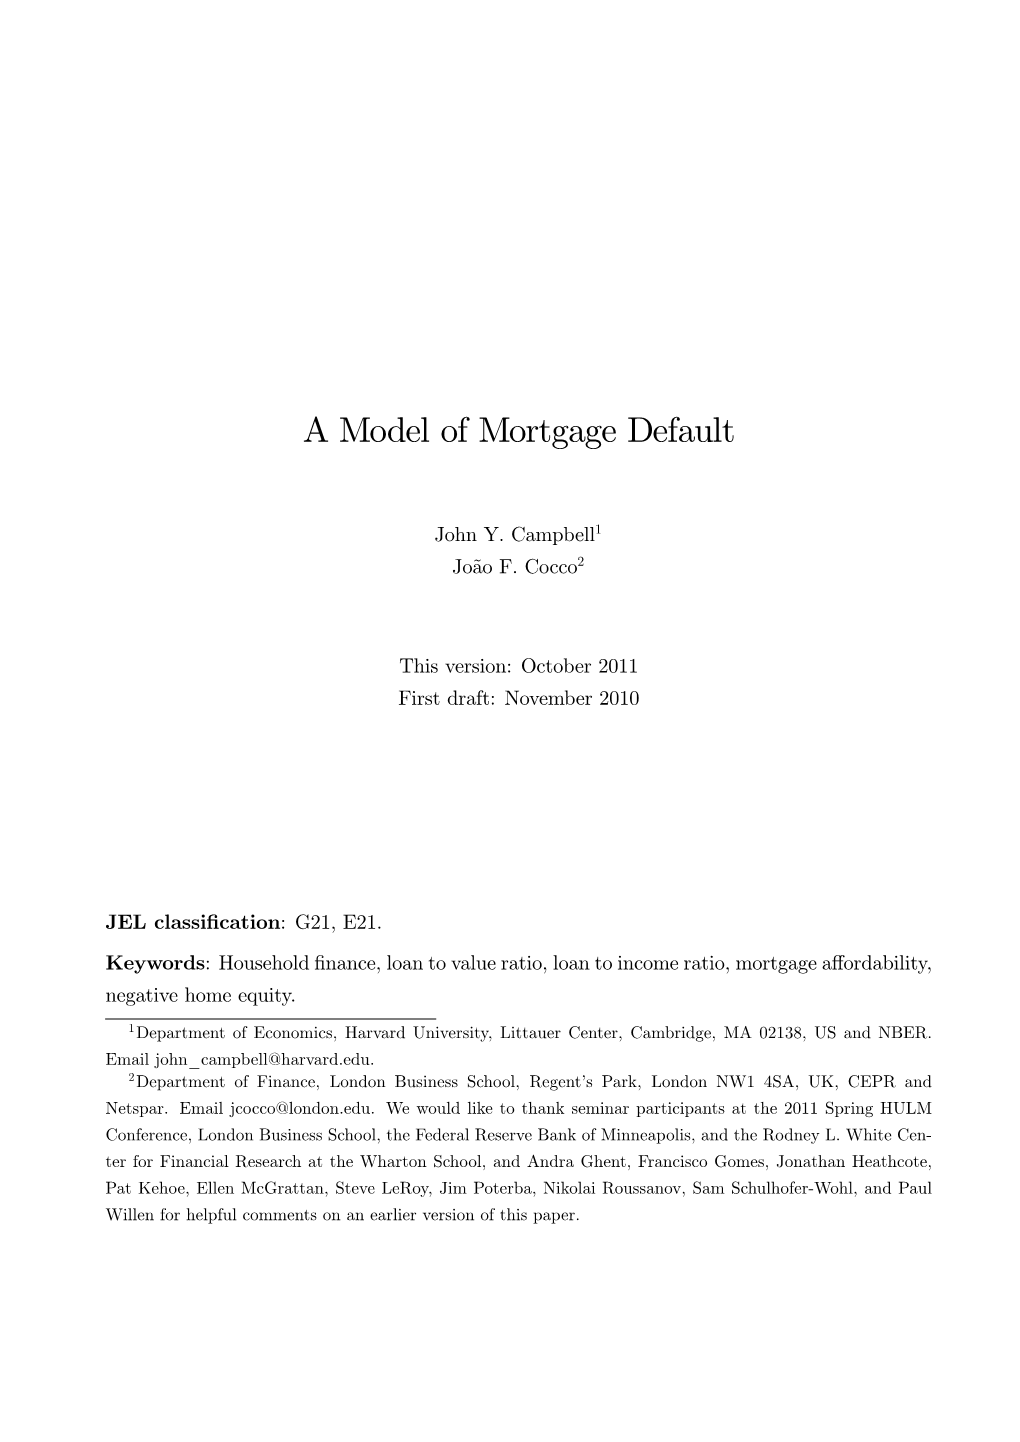 A Model of Mortgage Default